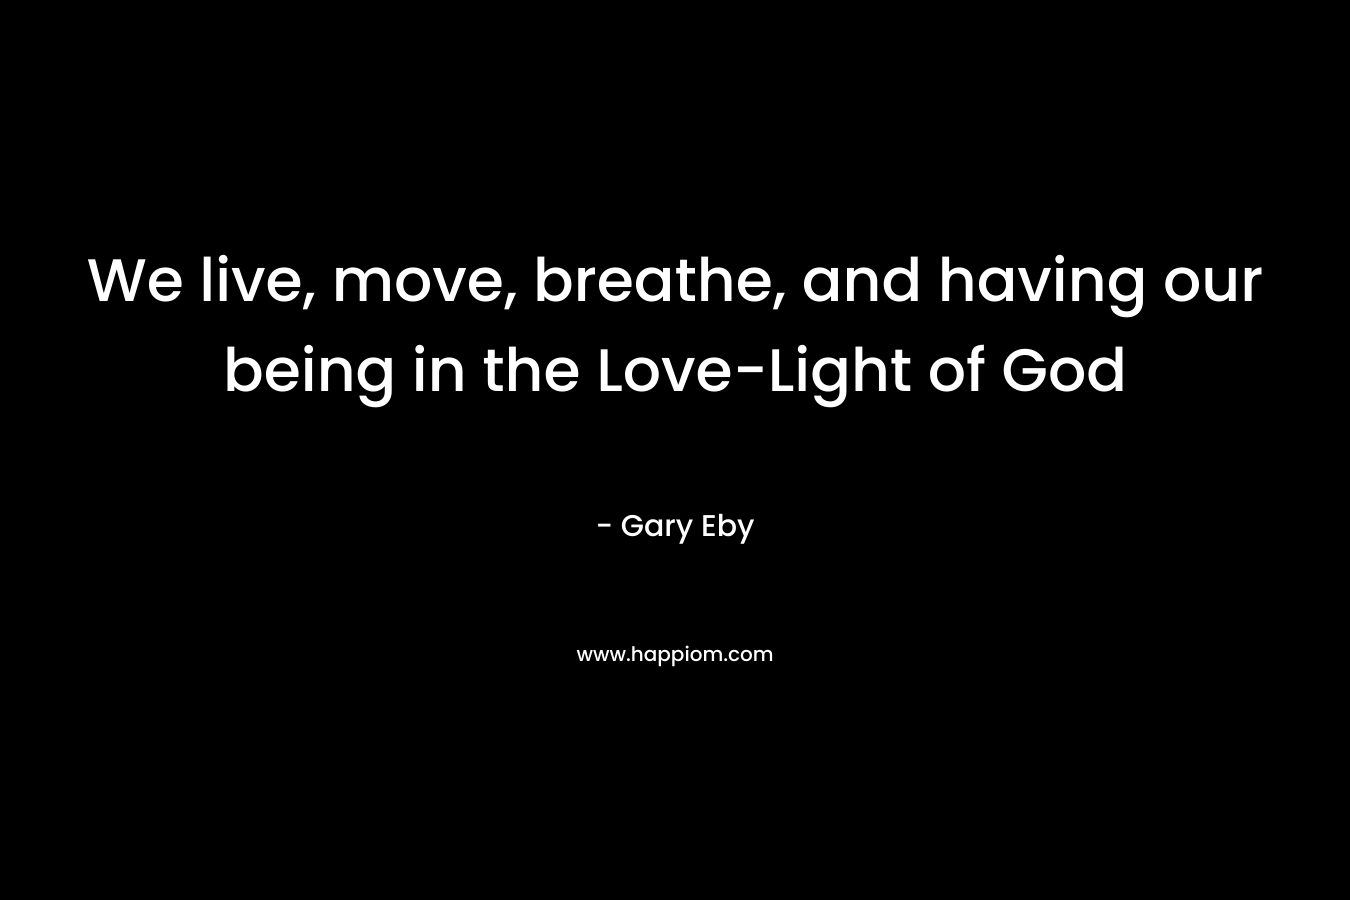 We live, move, breathe, and having our being in the Love-Light of God – Gary Eby